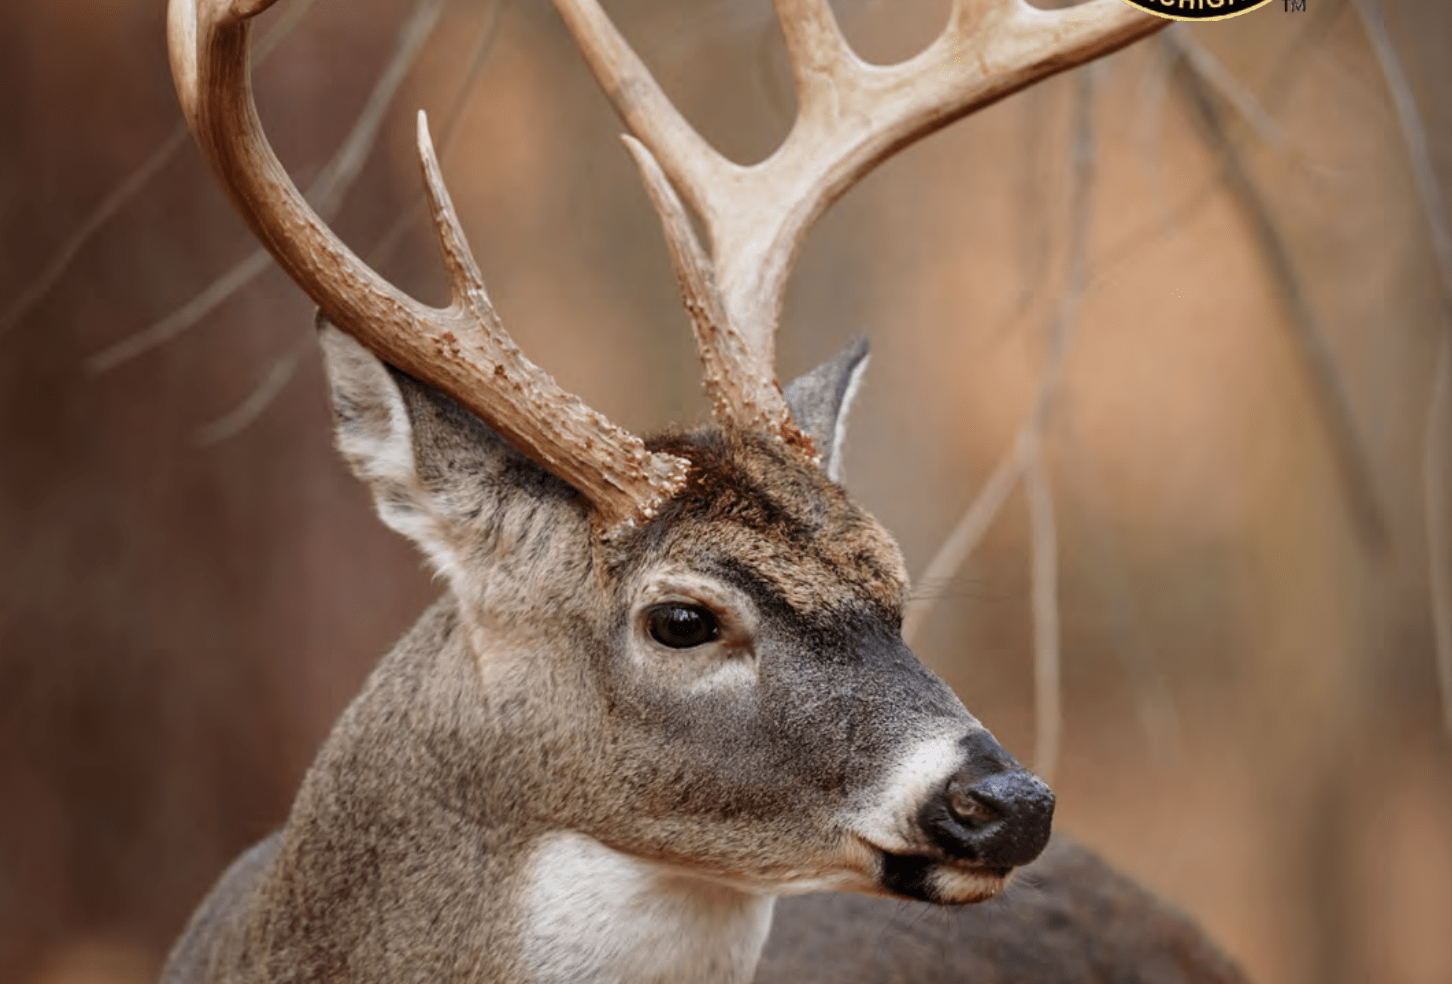 New reporting requirements for Michigan hunters as firearm season